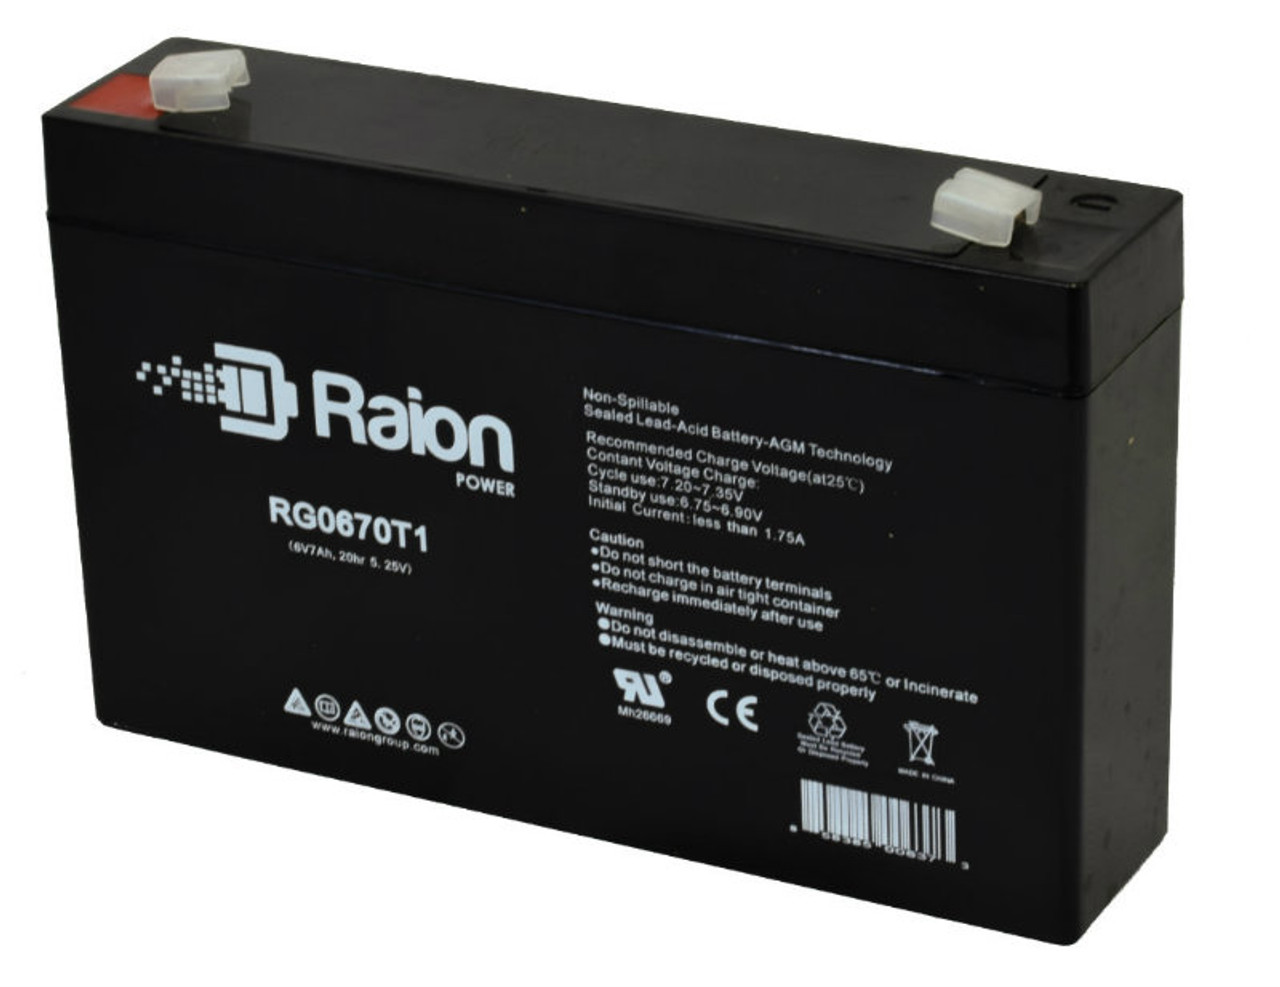 Raion Power RG0670T1 6V 7Ah Replacement Battery Cartridge for Pace Tech Inc. 2200 ECG MONITOR BACKUP Medical Equipment